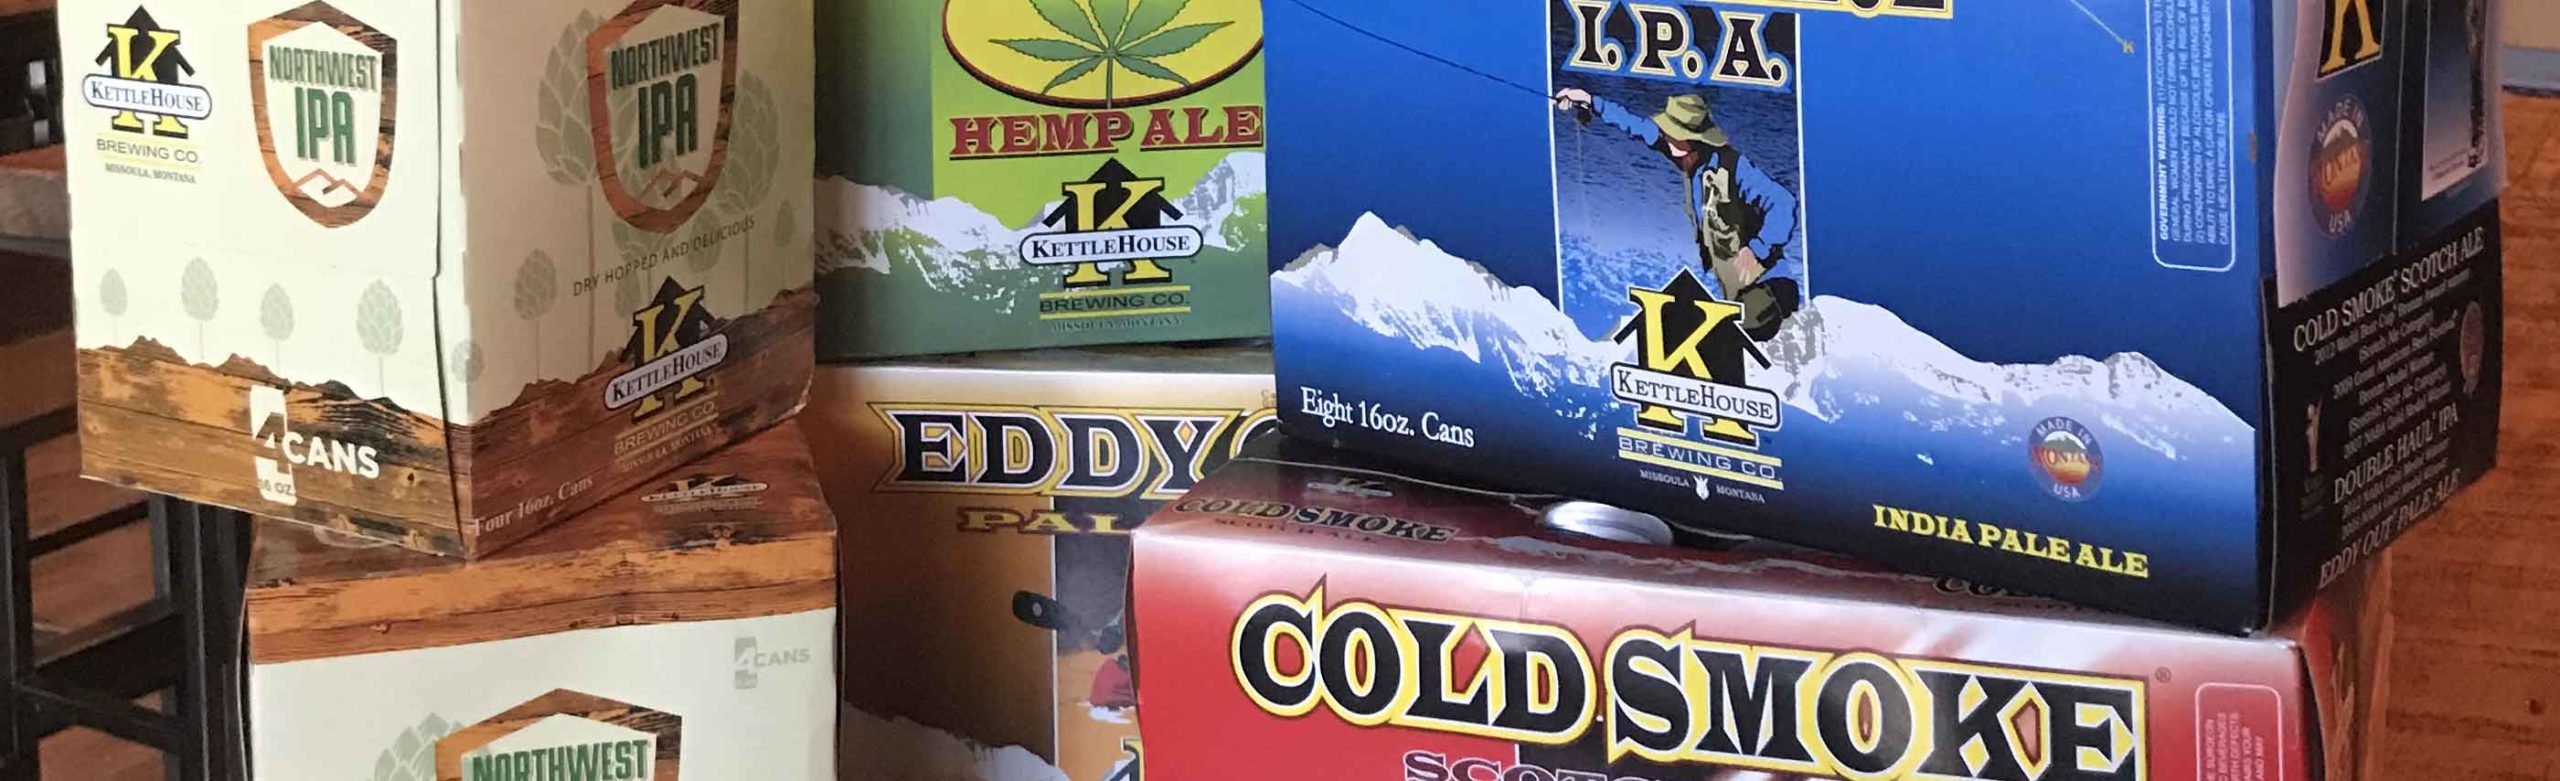 KettleHouse Beer Liquidation Sale at the Top Hat Image